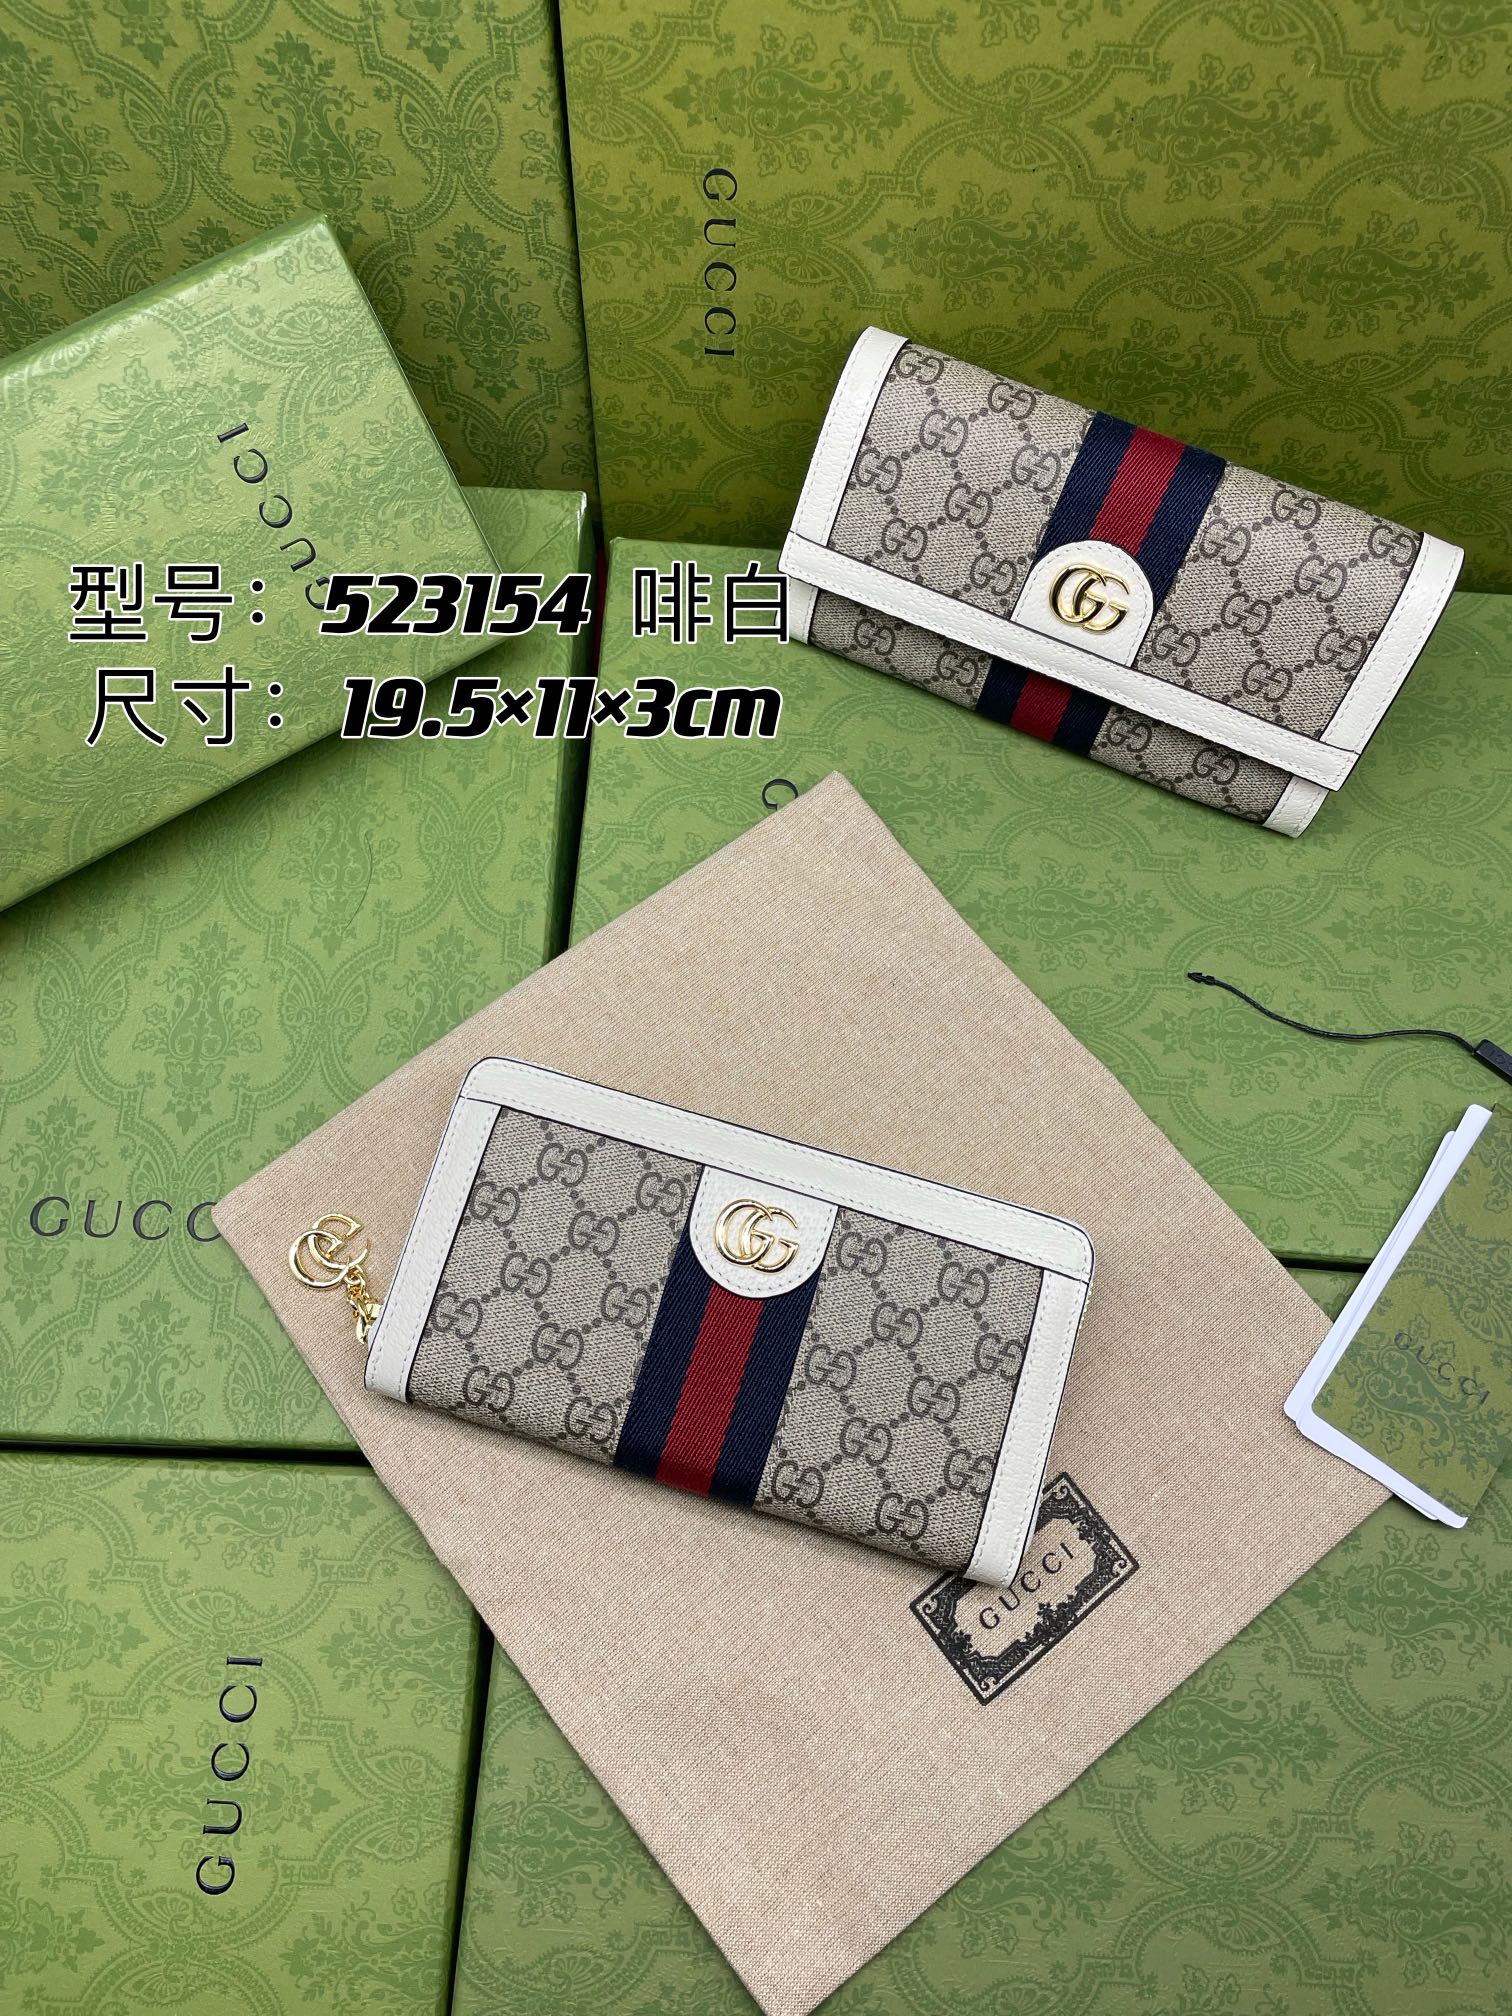 Copy Gucci 523154 Ophidia Zip Around Wallet with Web